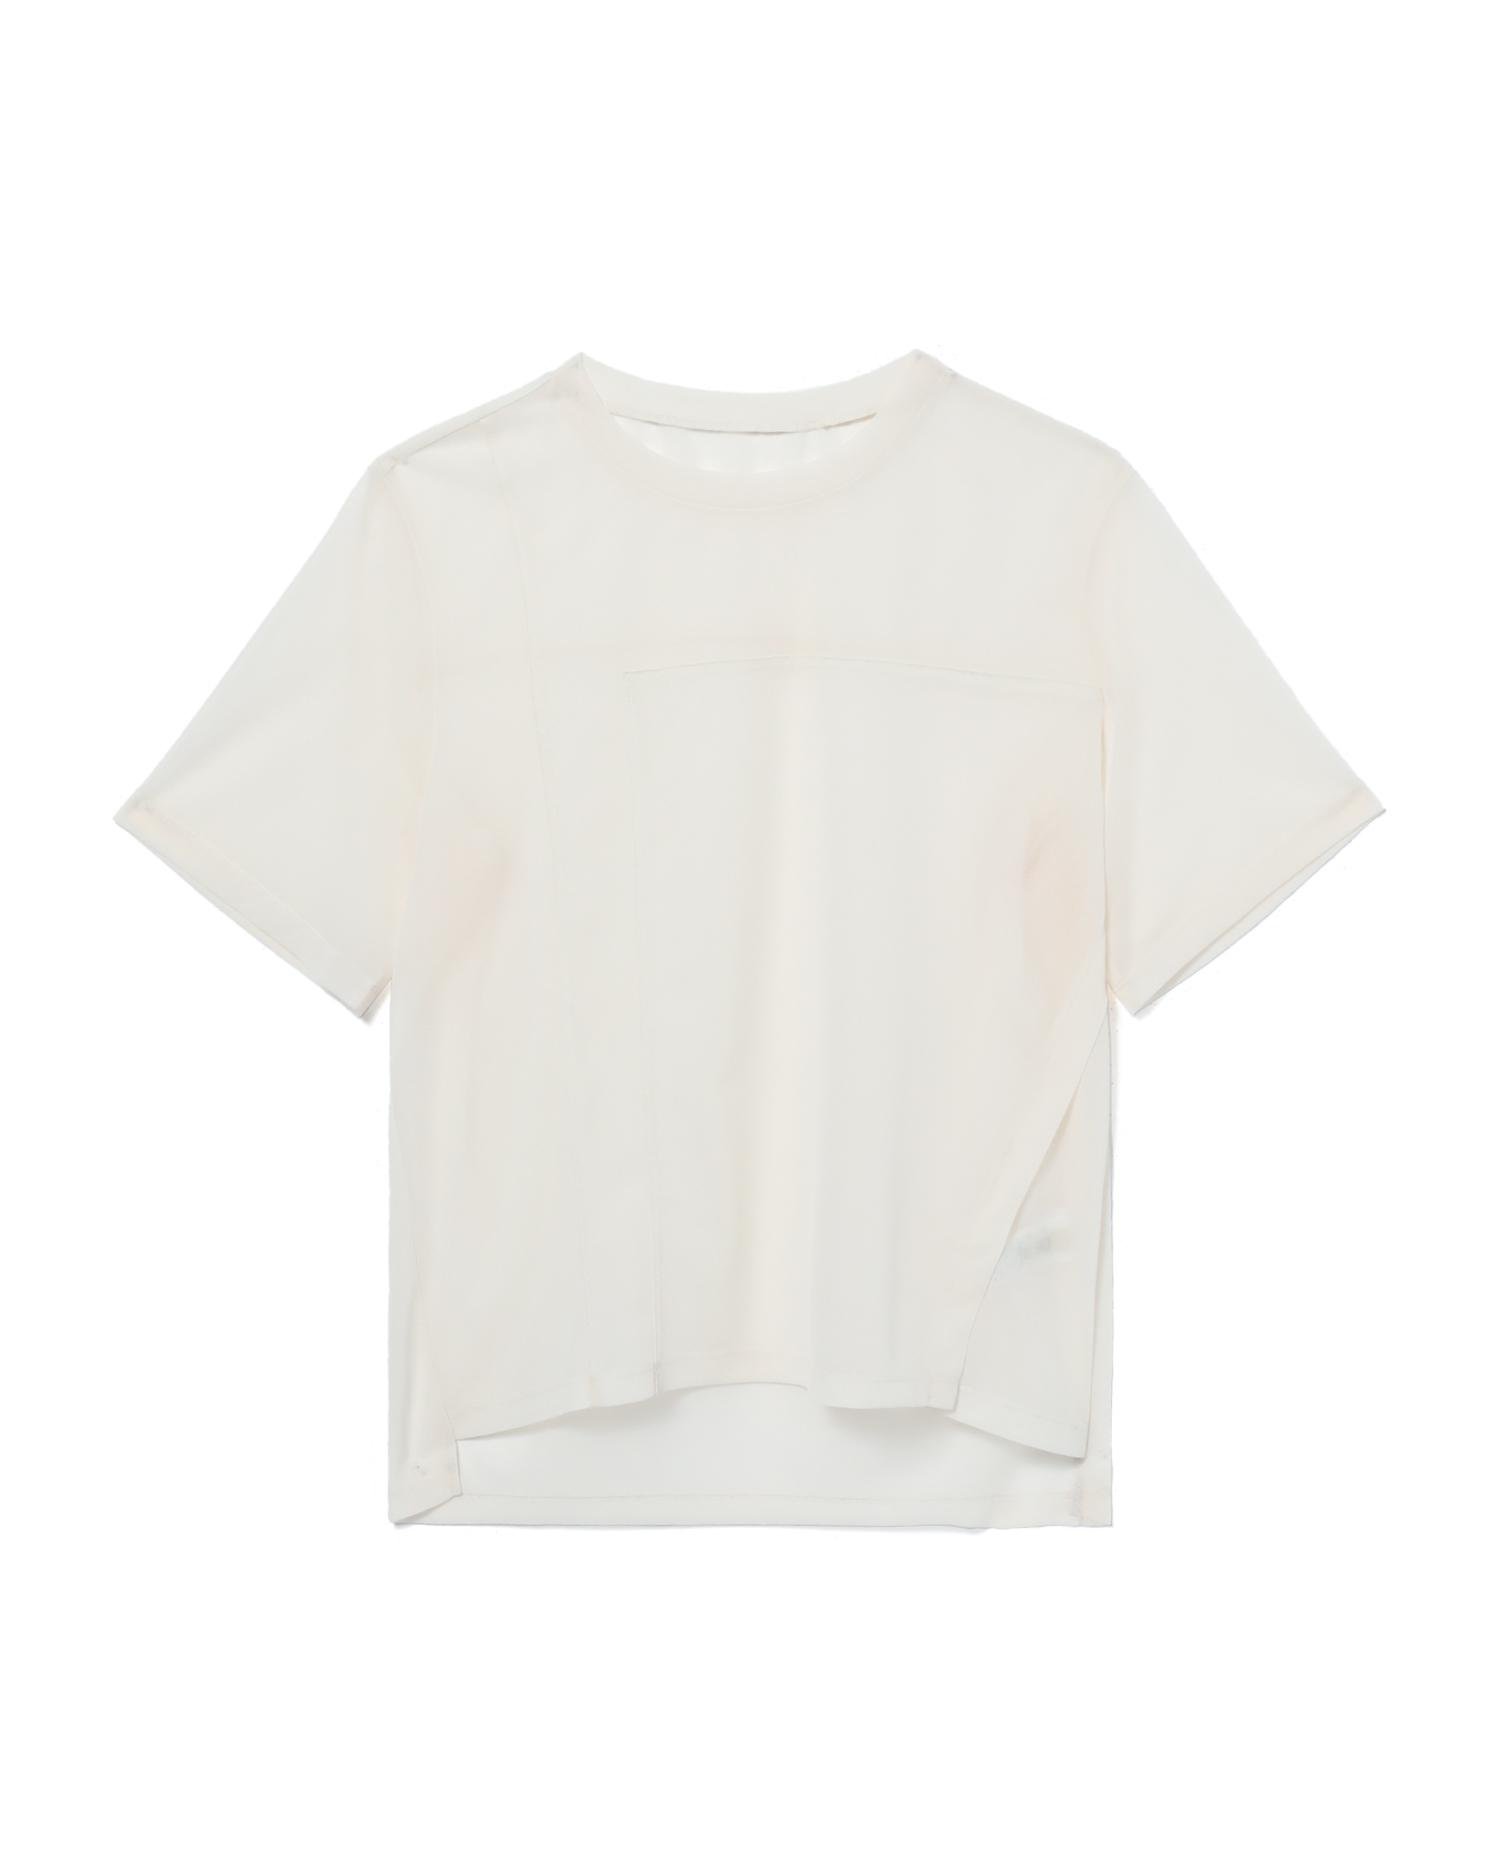 Panelled tee. by D'DEMOO